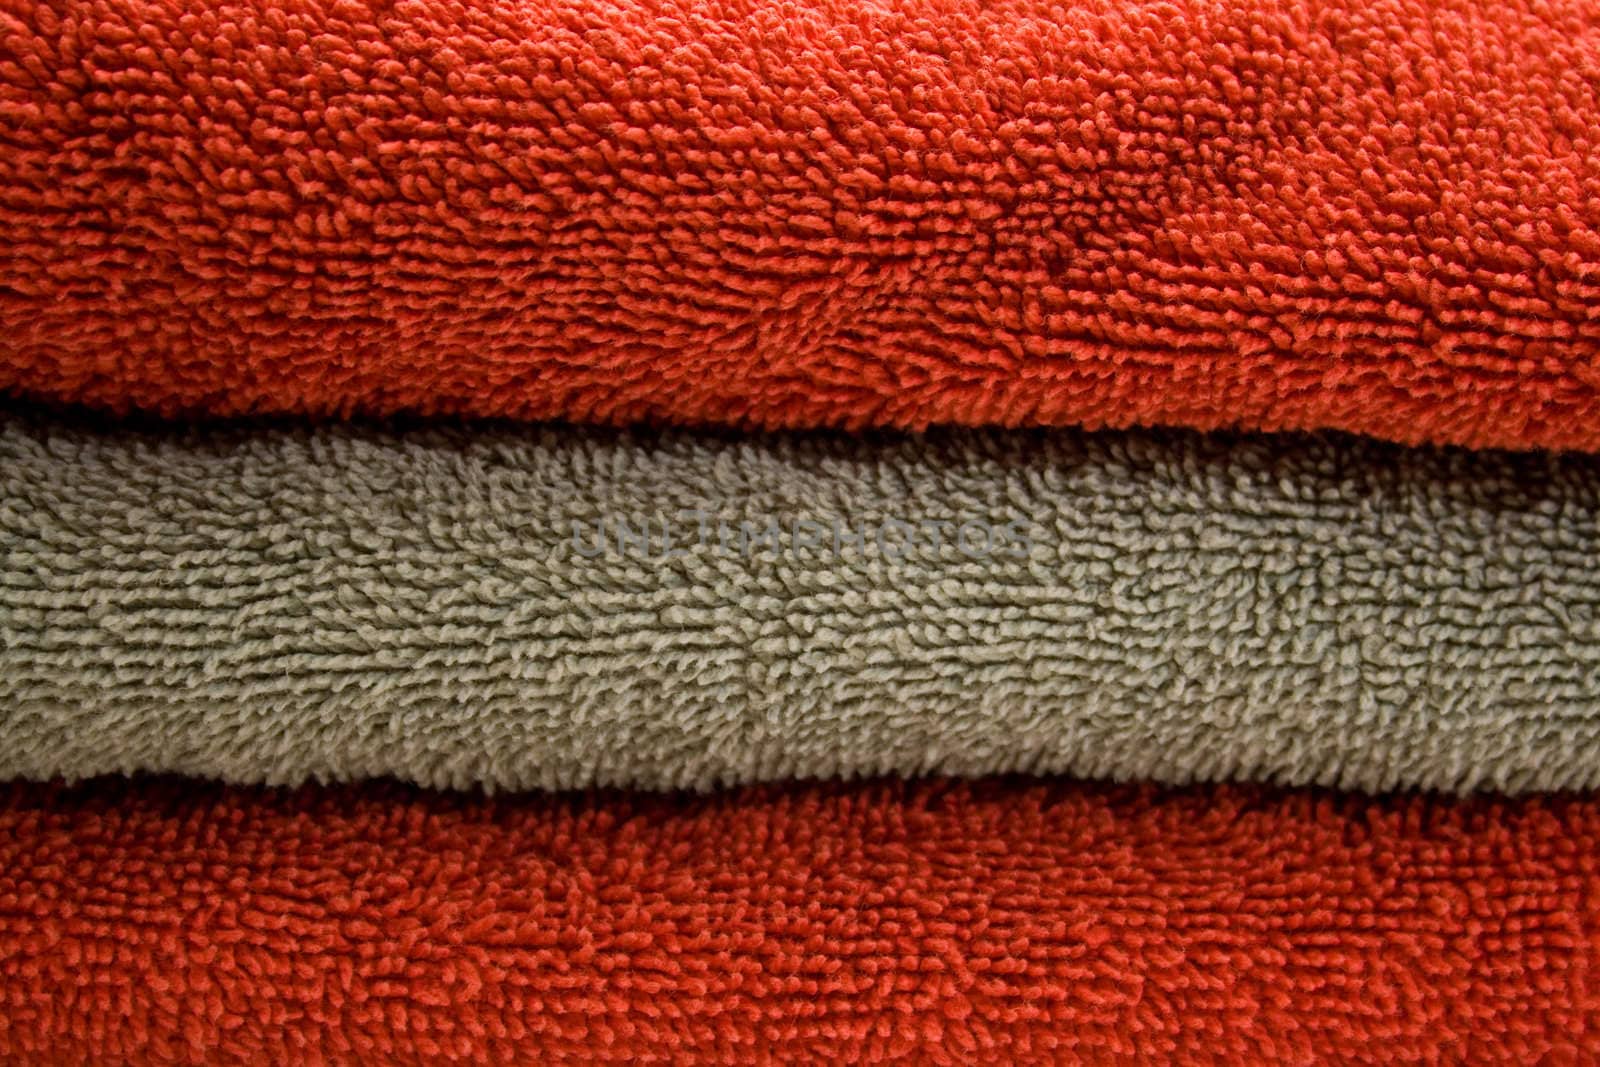 cotton towels by nubephoto